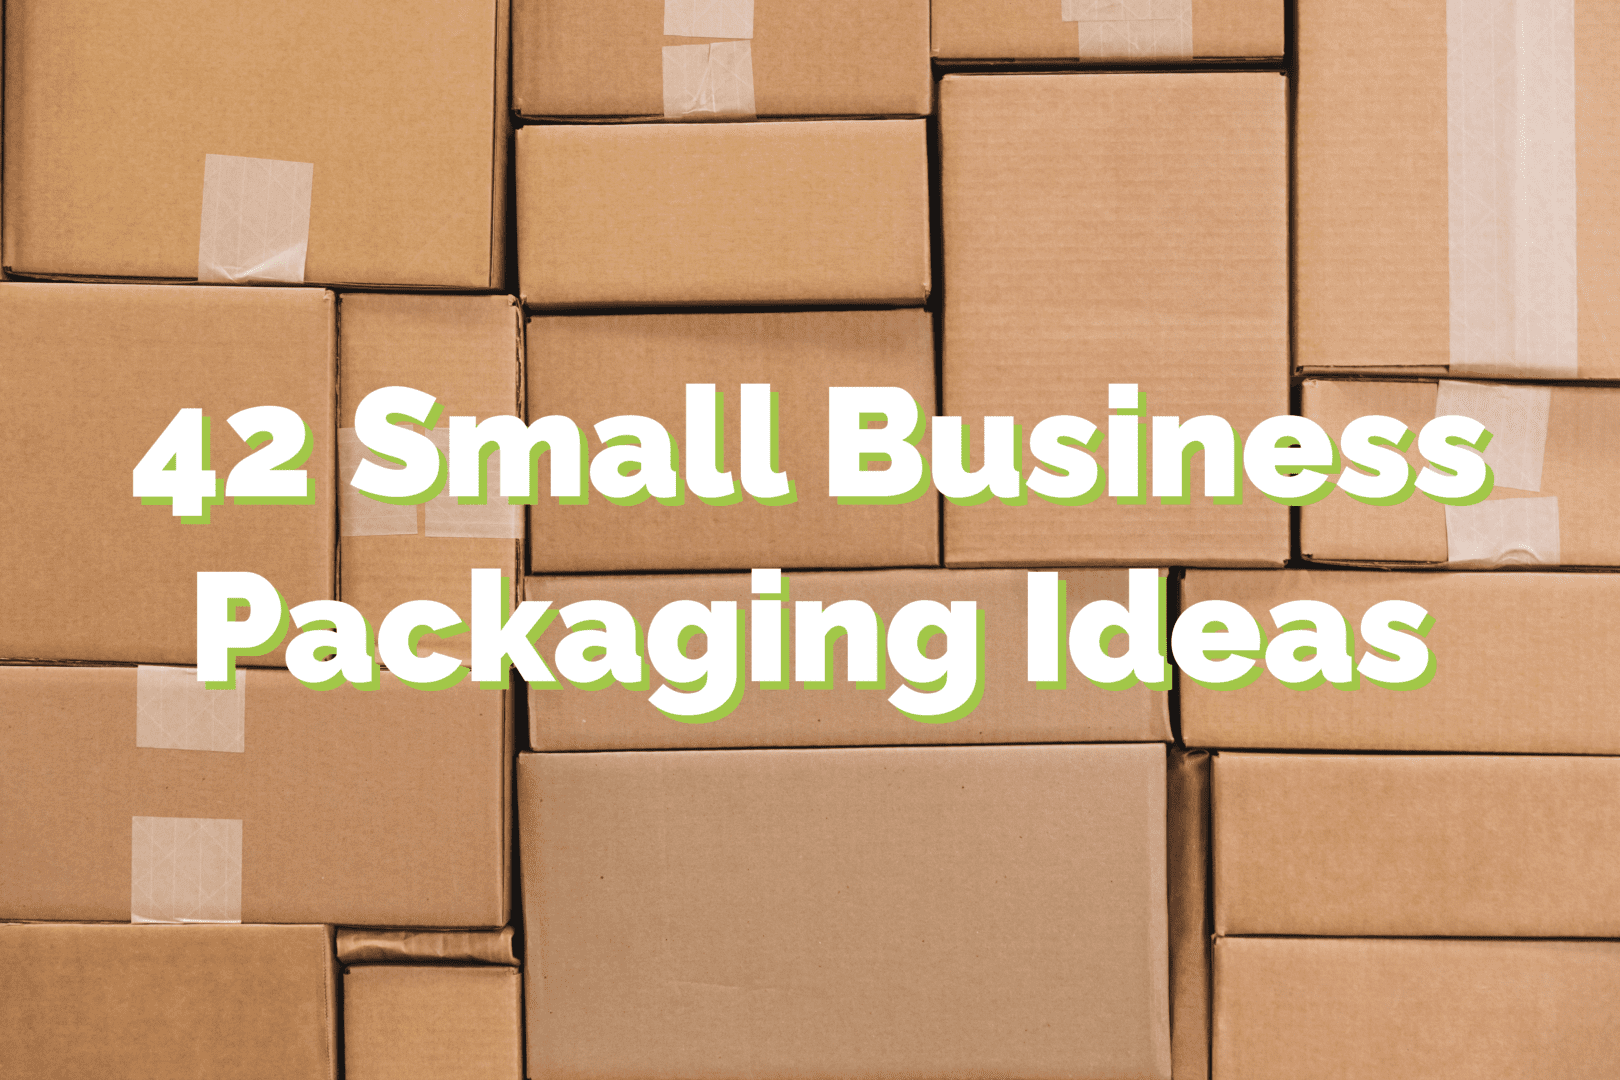 42 Small Business Packaging Ideas